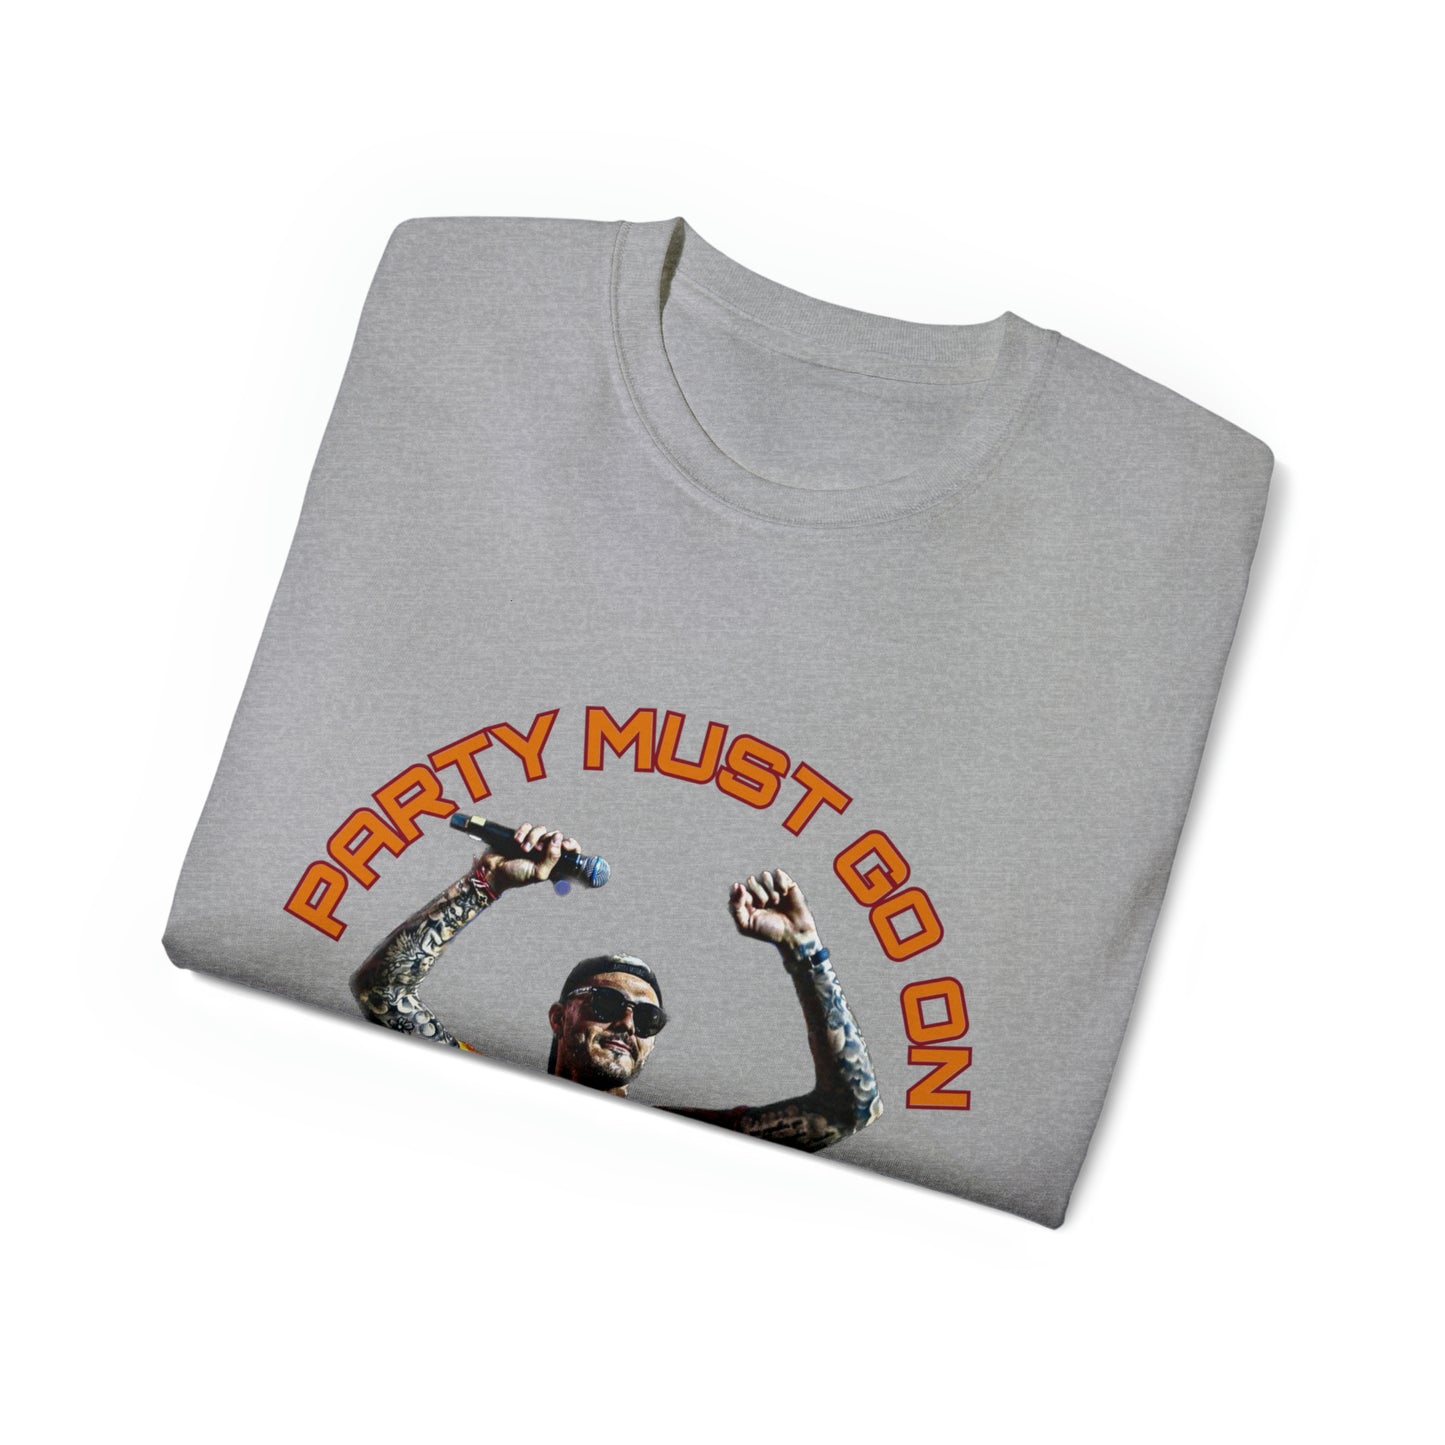 ICARDI PARTY MUST GO ON - UNISEX T-SHIRT